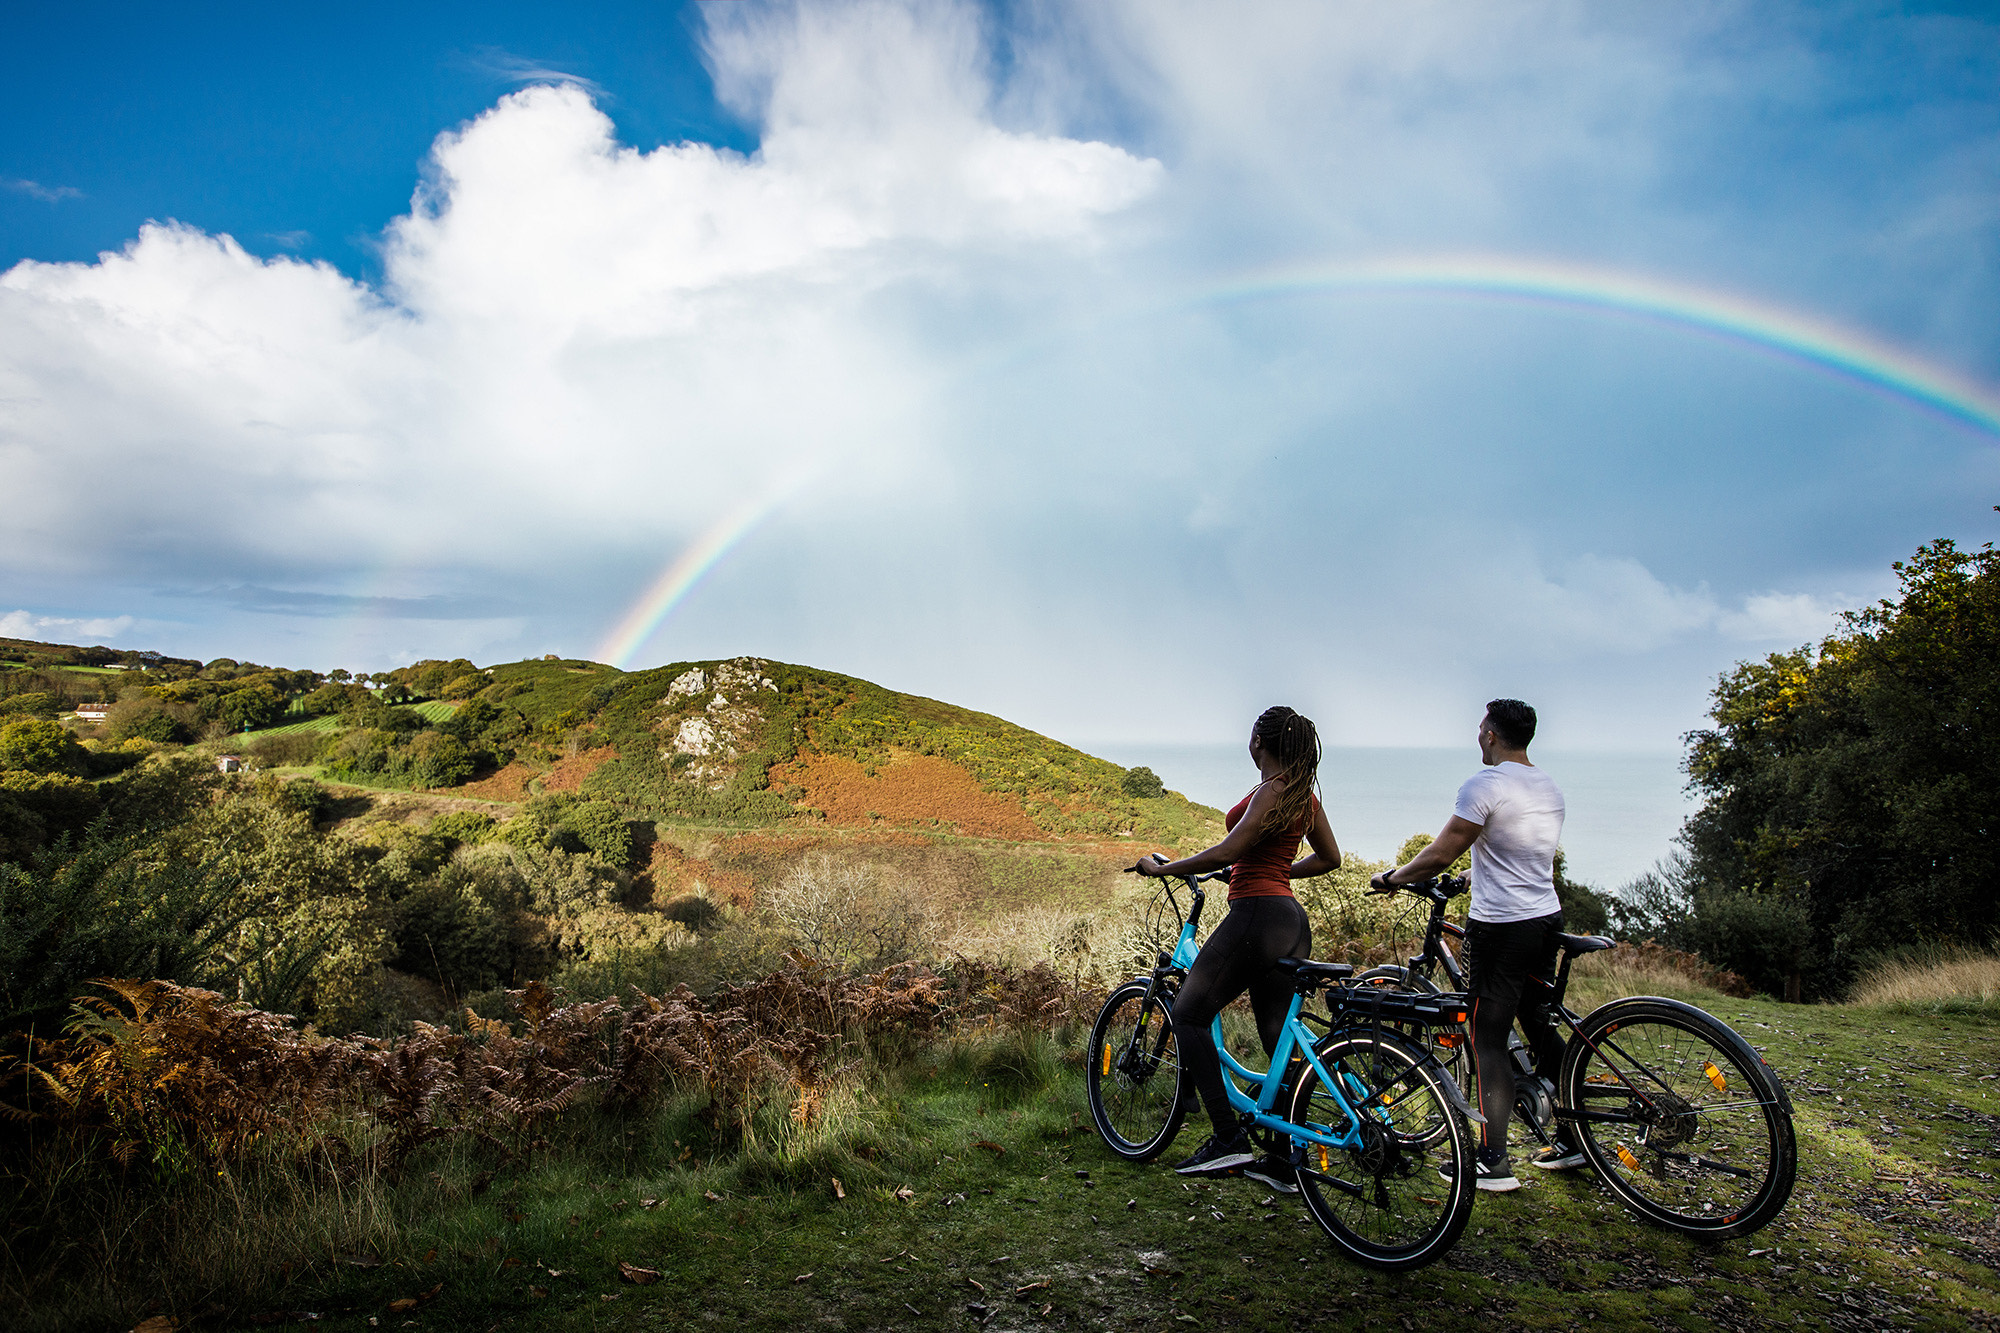 A man and a women look at a rainbow while riding electric bicycles.